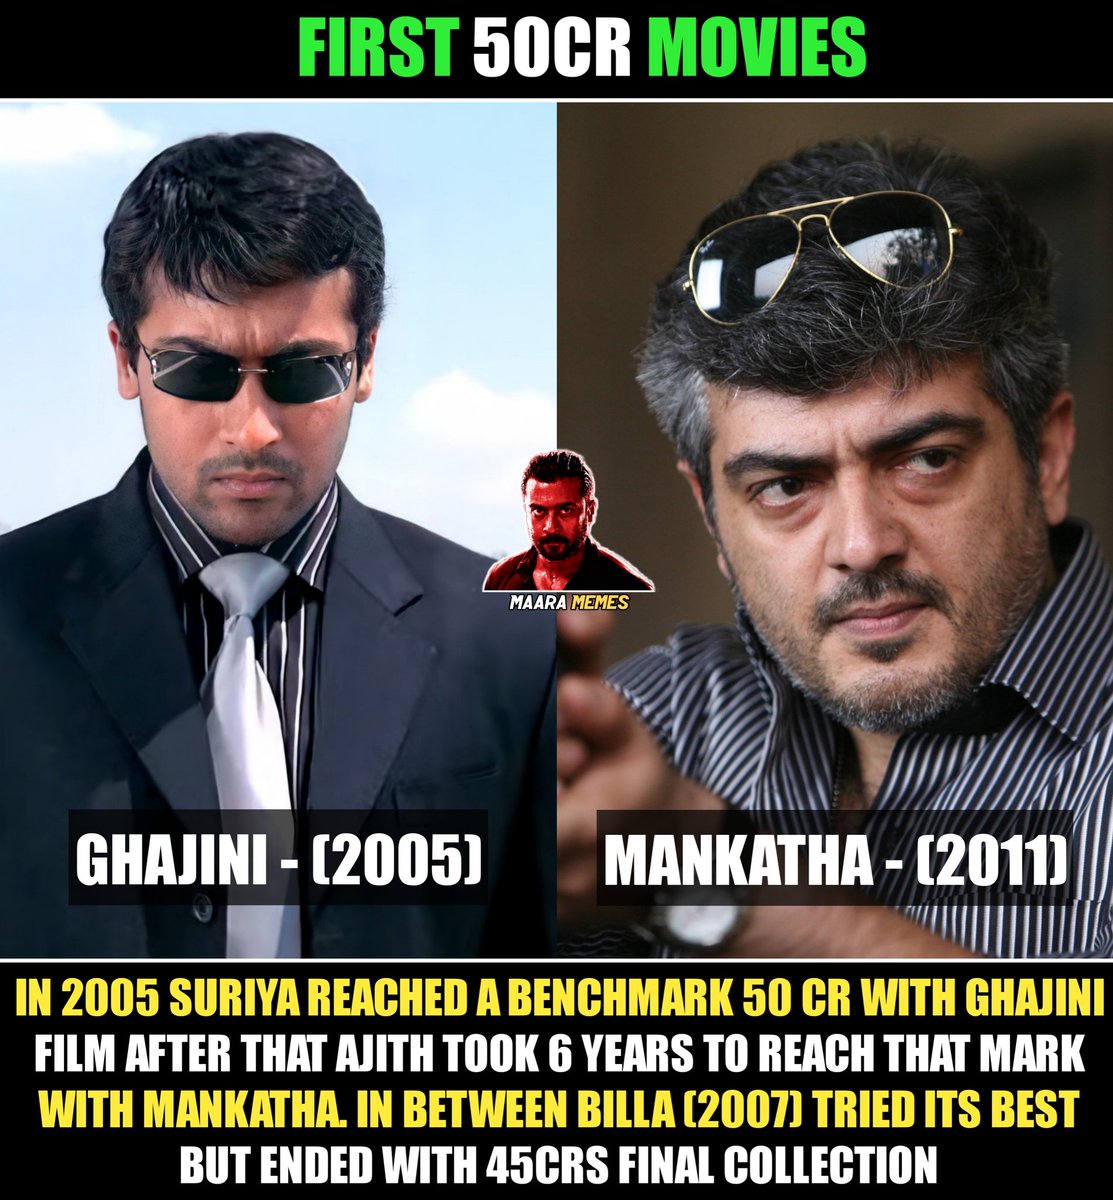 MEANWHILE AJITH MAAMA 🤡😭

Still The Fans are Confused About Which Was His First 100 Crore Film: Vedhalam or YennaiArindhal. However Ajith Took 3-4 Years (After Suriya's #7AumArivu) to Enter The 100 CRORE CLUB...

However 
SURIYA >>> AJITH

(1/2)